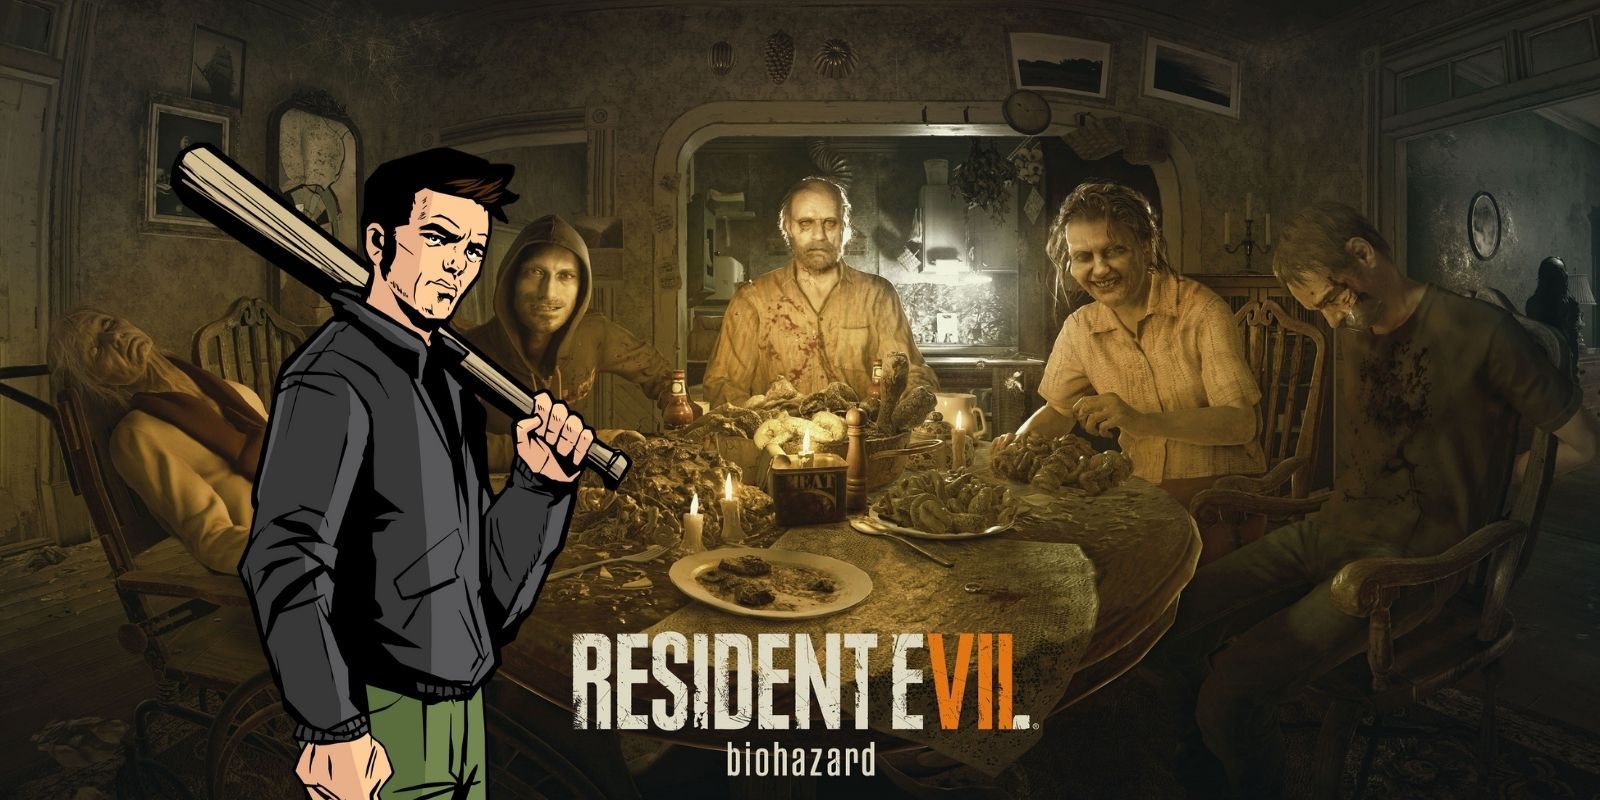 The family of Resident Evil III with the protagonist from GTA III